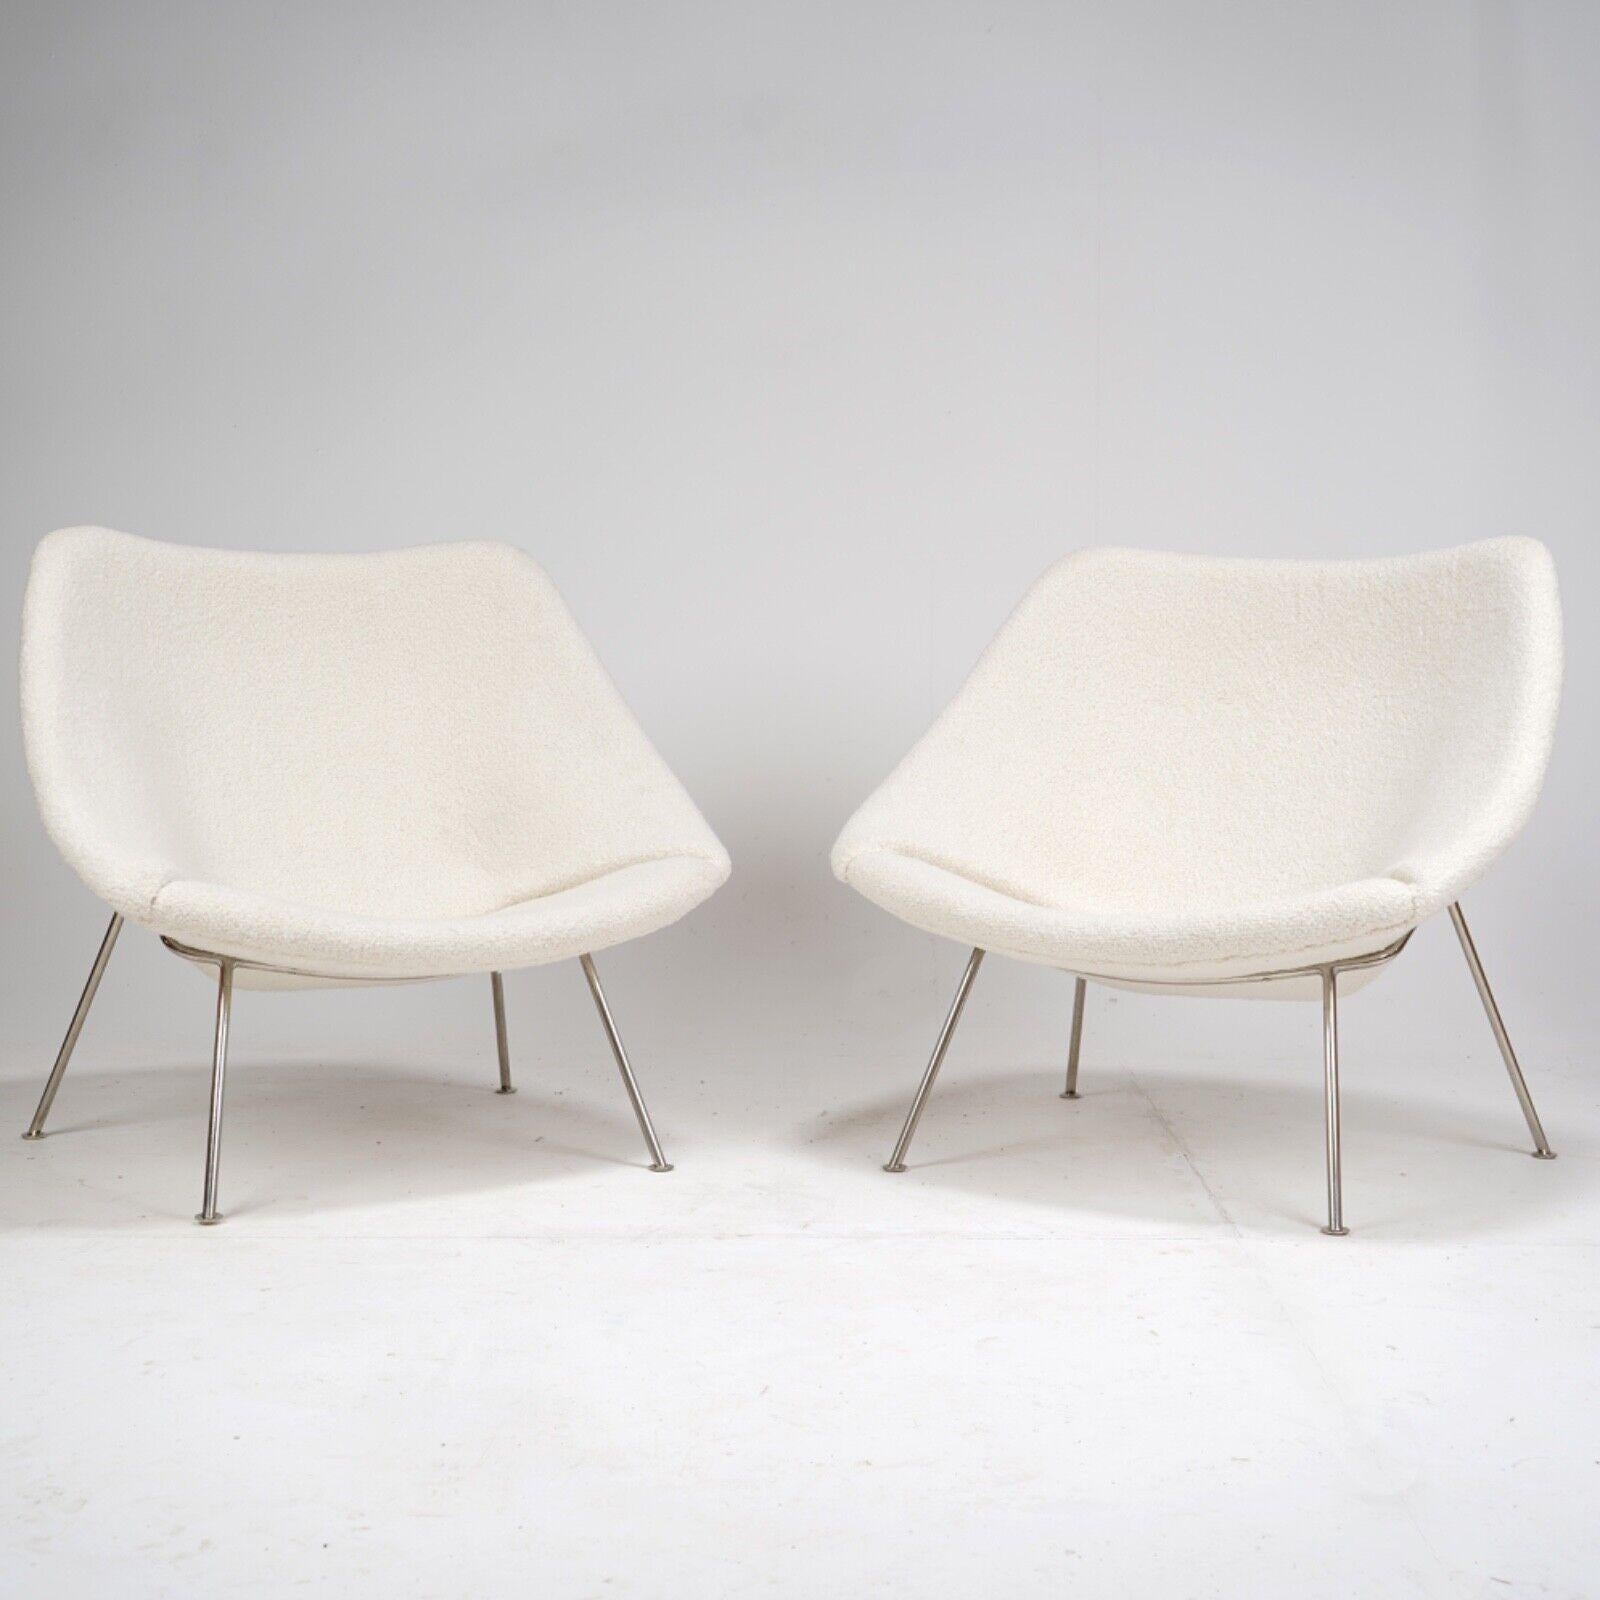 A pair of Pierre Paulin Oyster chairs.
Designed by Pierre Paulin for Artifort in the 1960s.
It has been fully refurbished, newly foamed and upholstered in 100% Wool Bute Island boucle.
Orignial Artifort tags on both chairs.
As well as being a